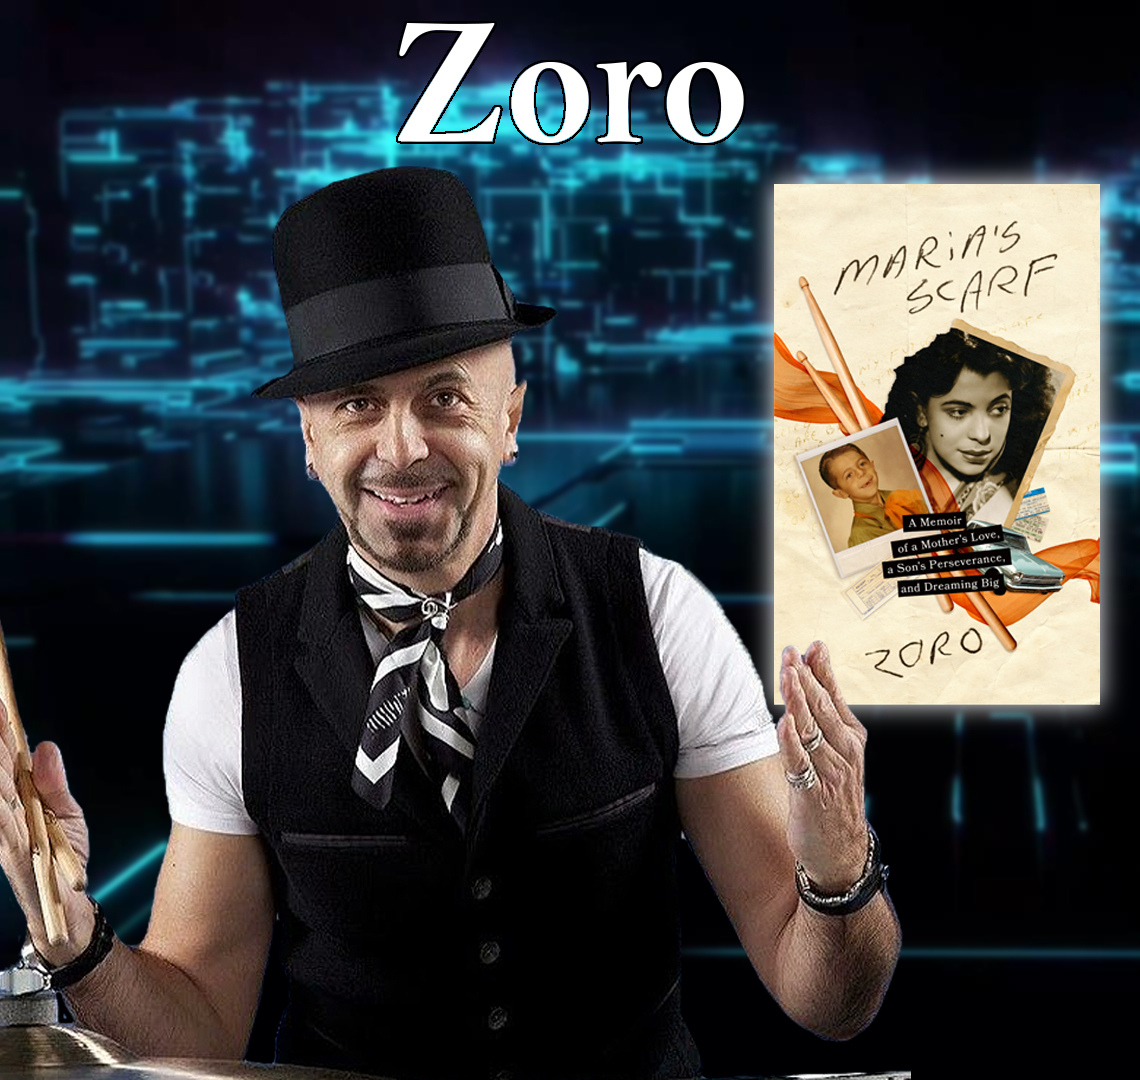 World-Renowned Drummer/Author Zoro Guests On Harvey Brownstone Interviews